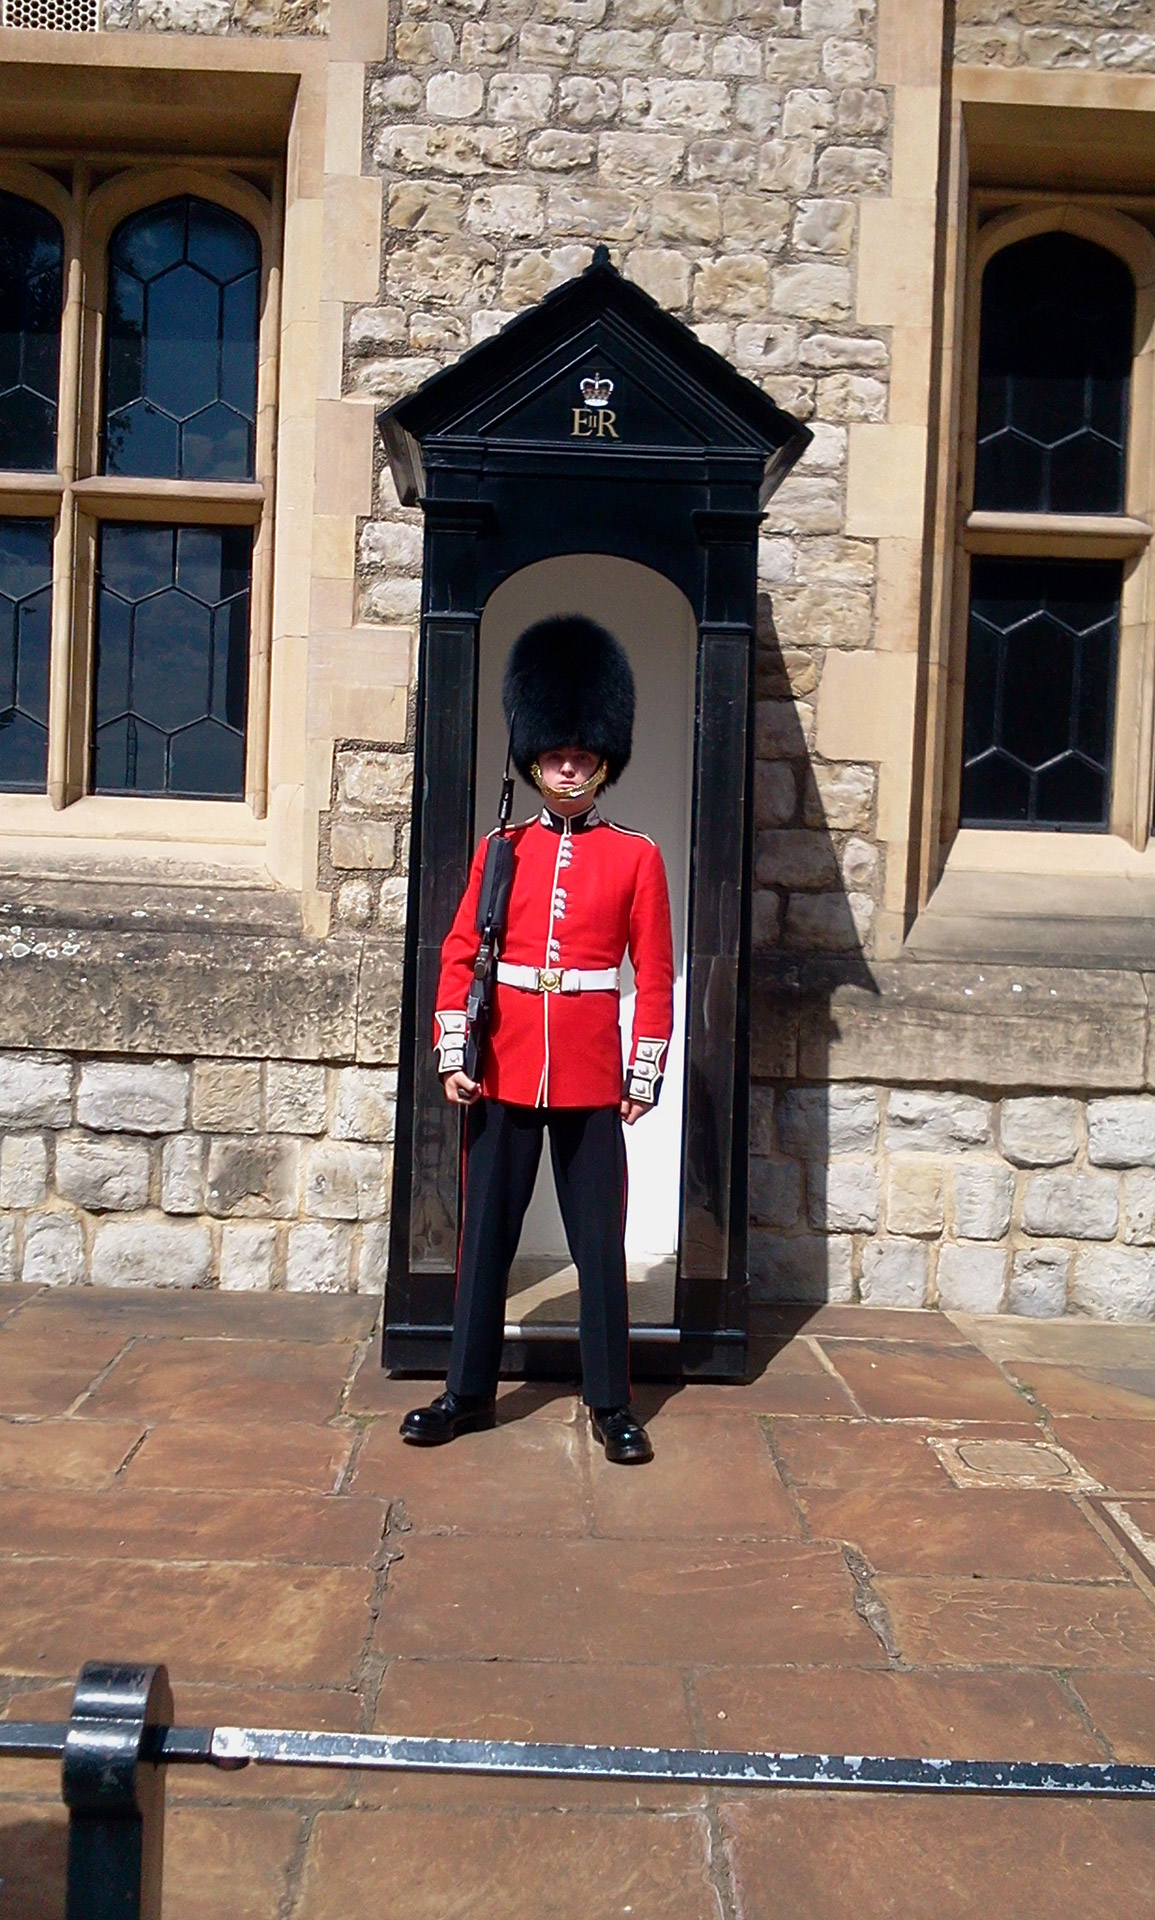 soldier guard crown jewels free photo